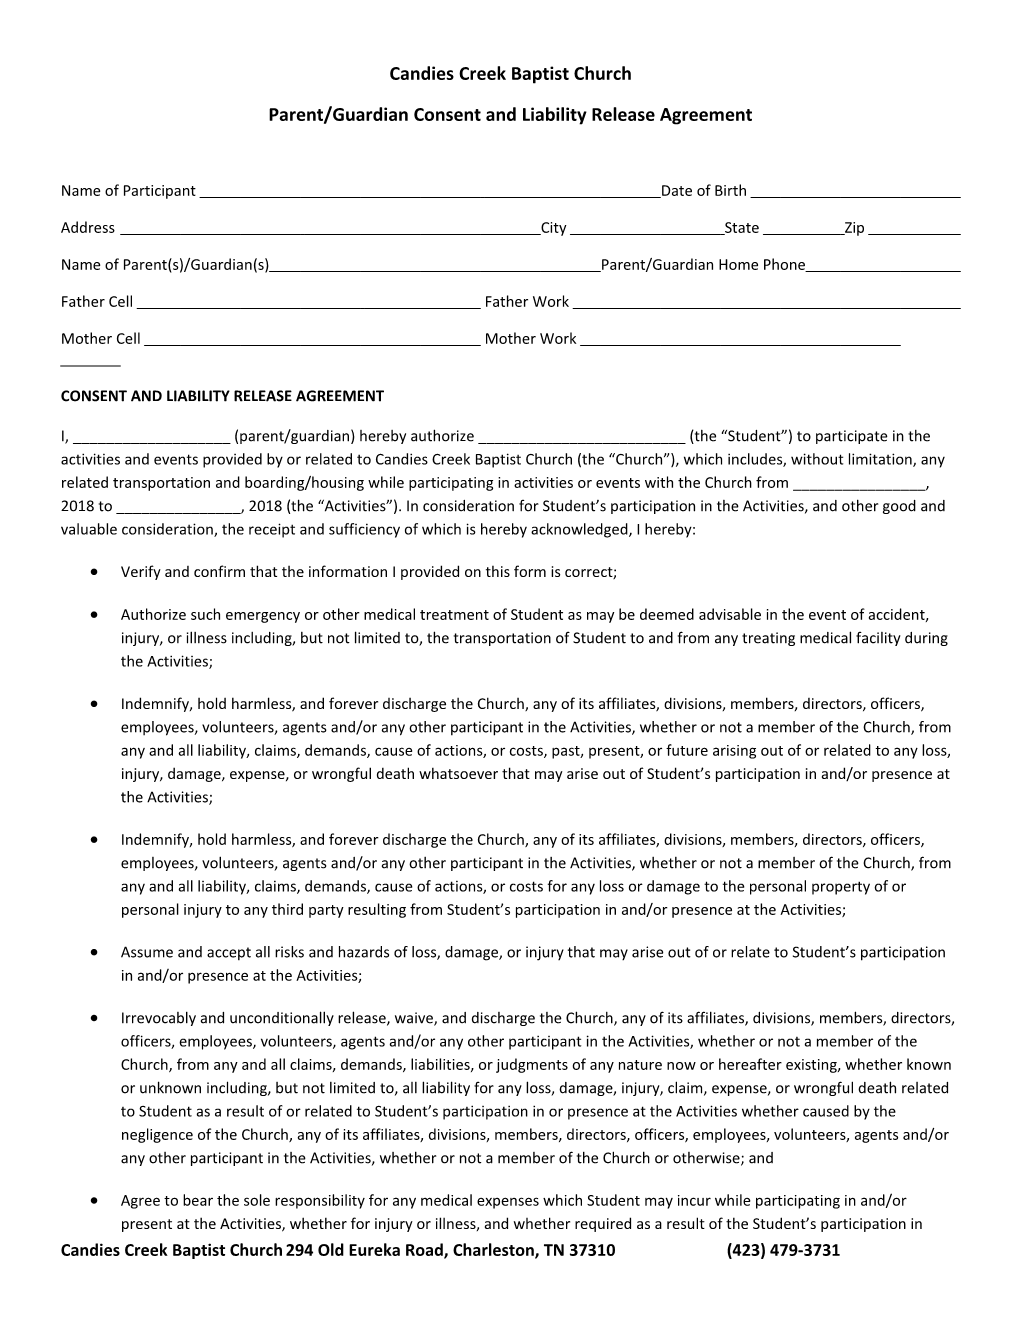 Parent/Guardian Consent and Liability Release Agreement